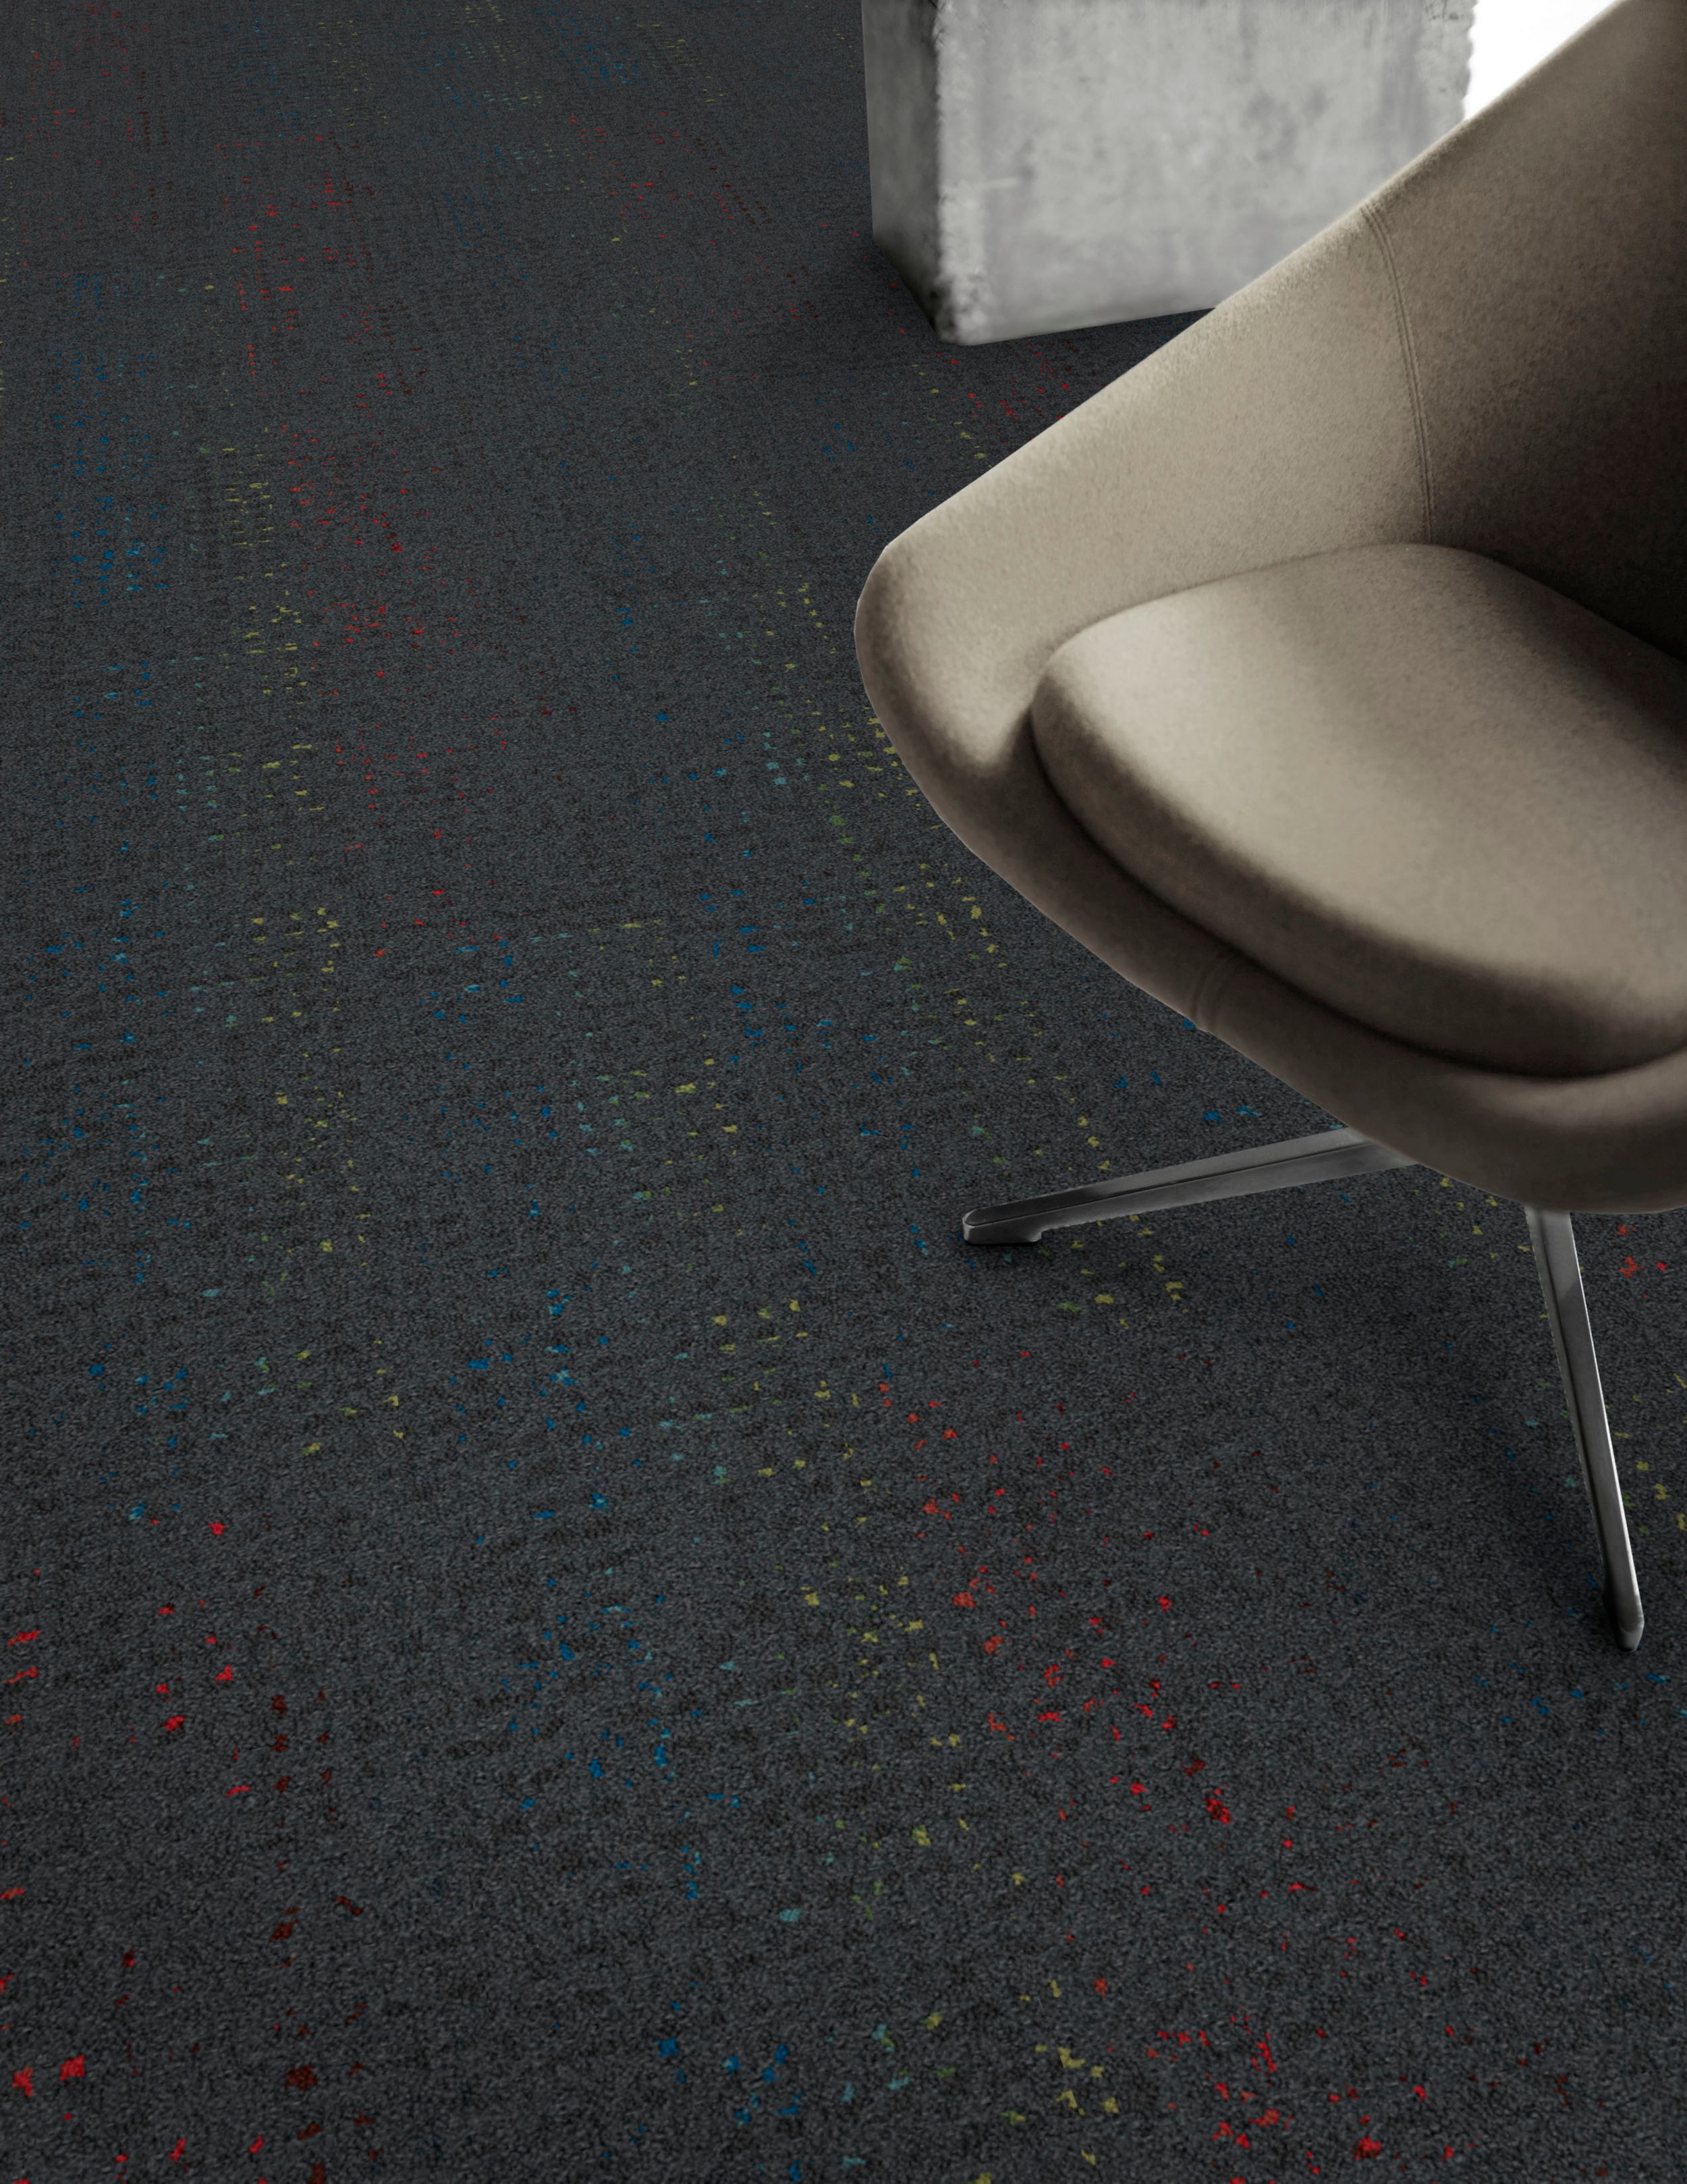 Detail of Interface Speckled plank carpet tile with chair imagen número 2